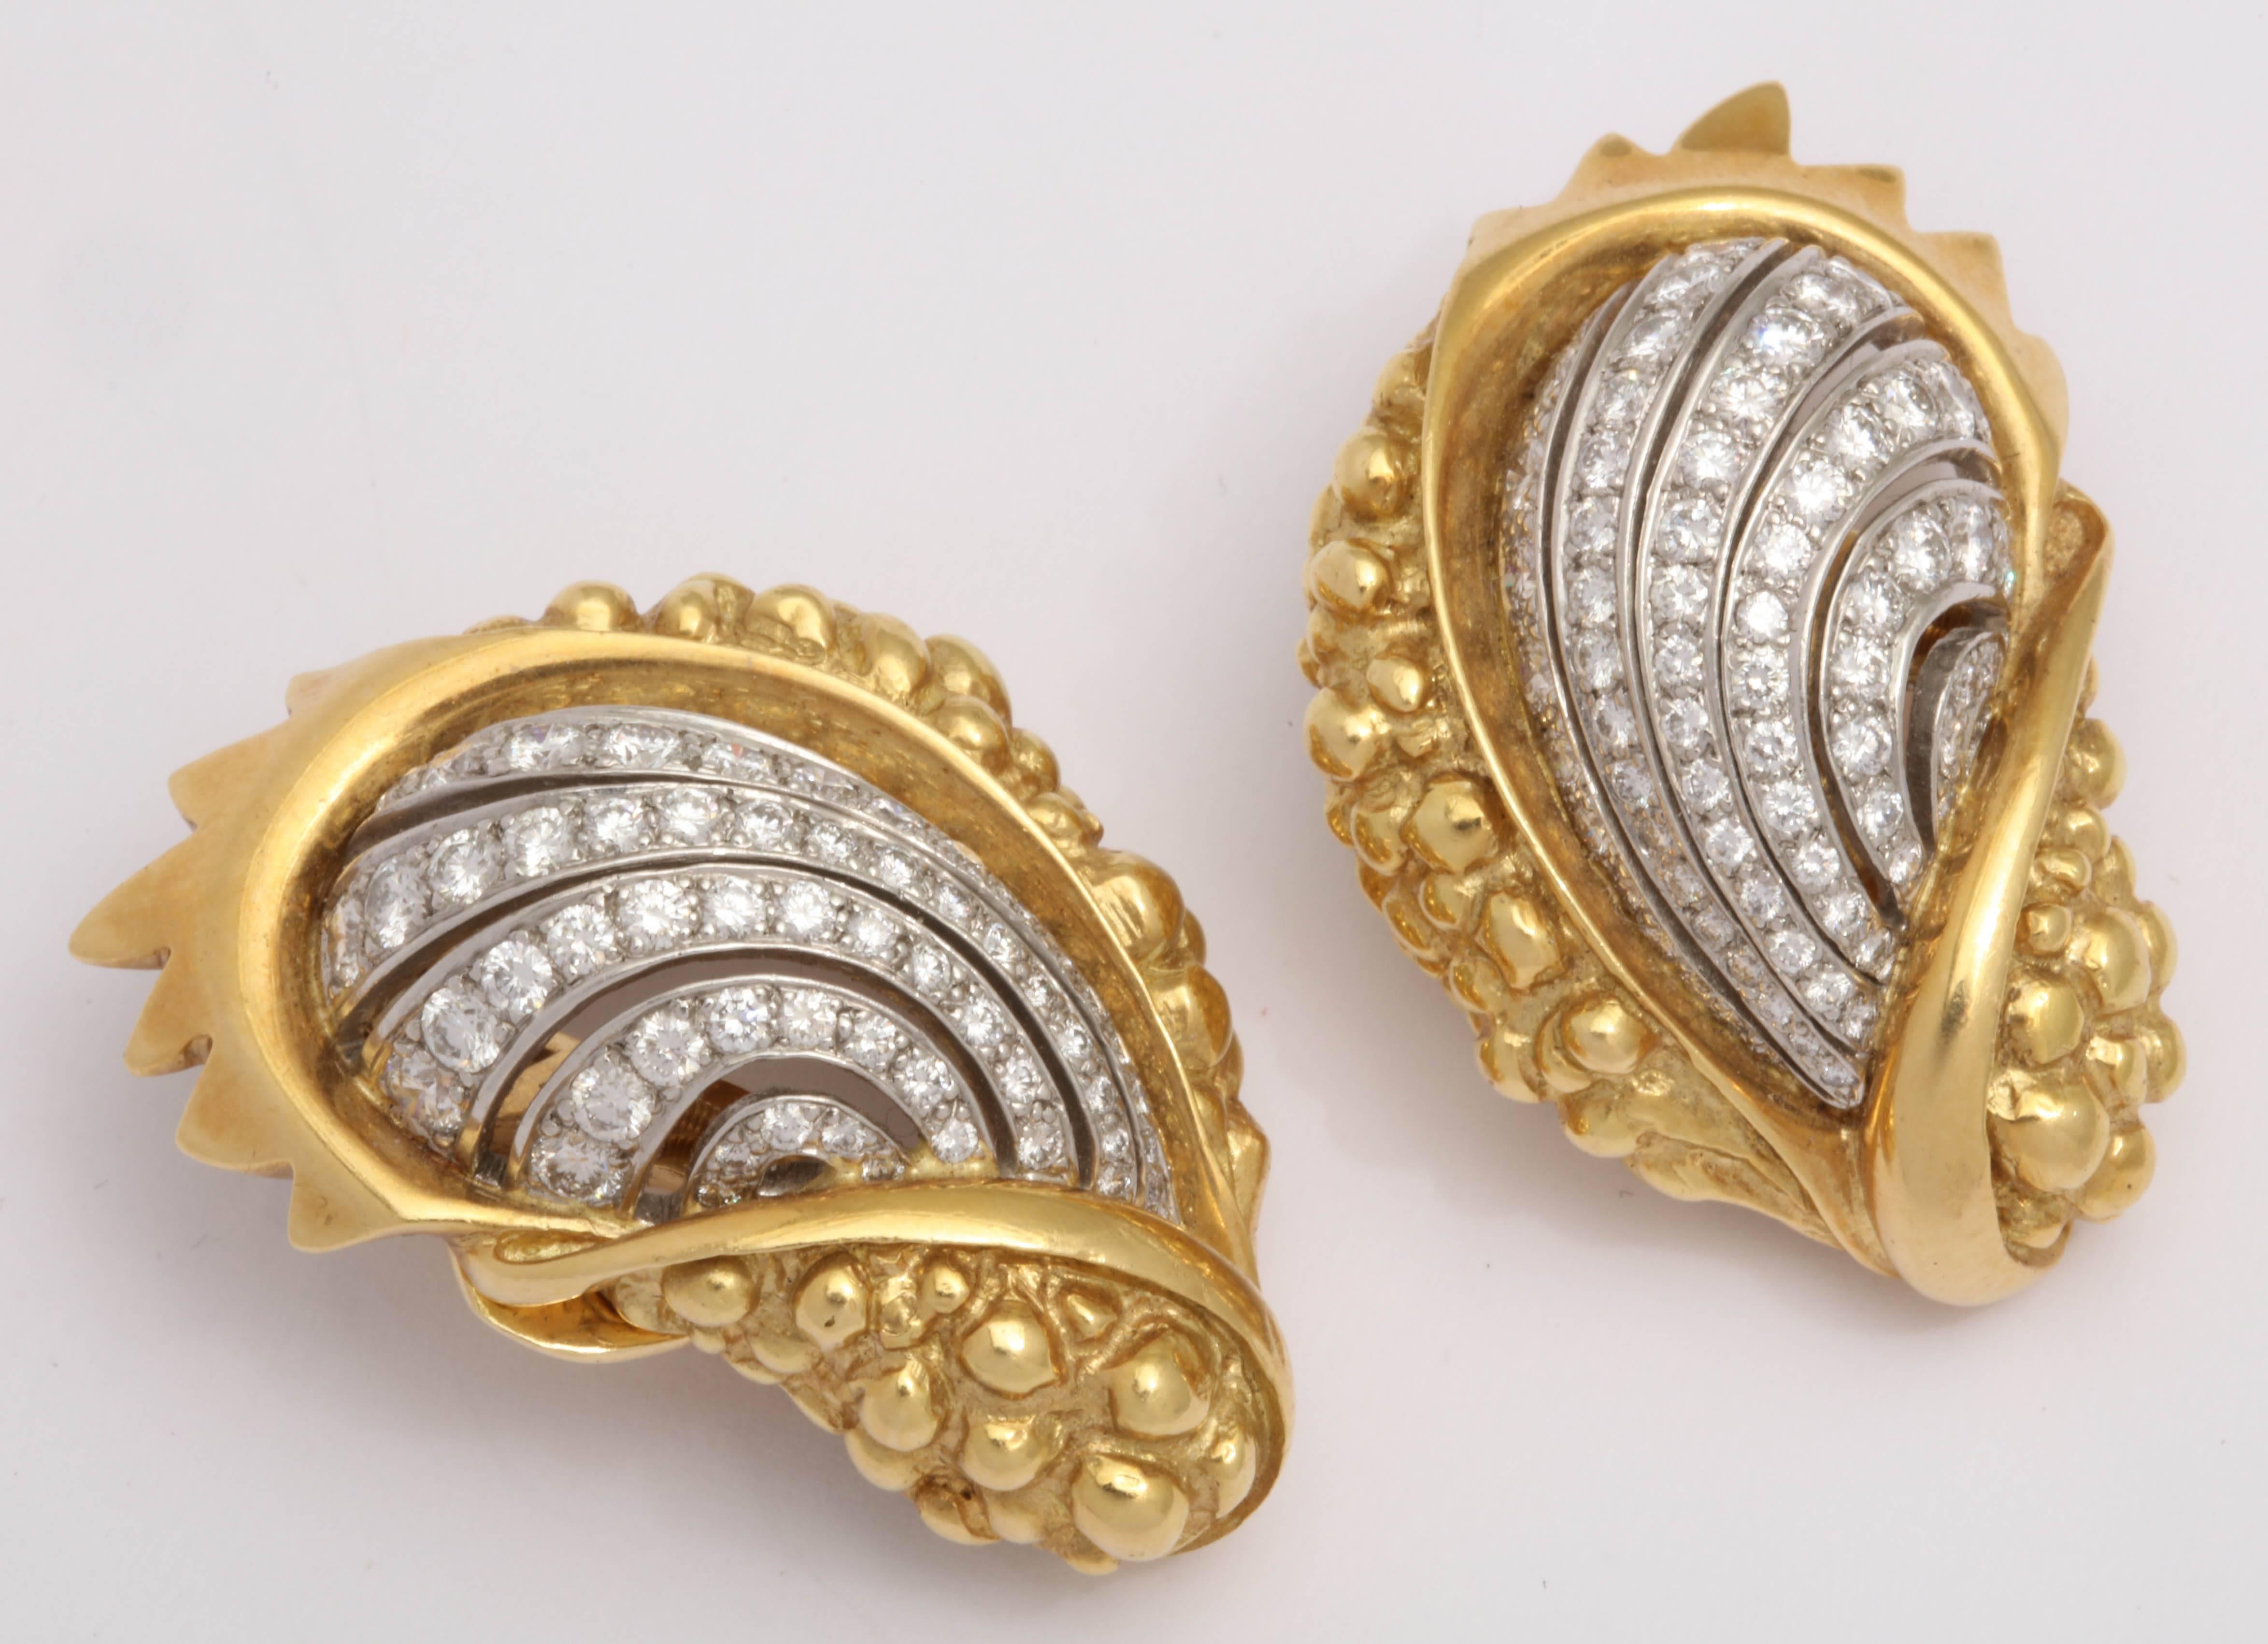 Signed Marilyn Cooperman Clip on Shell Earrings evocative of the Sea in a very sultry manner.  Each  Shell has a pierced  center section, pave set,  with Diamonds in Platinum surrounded by  a shell shape that is sumptuous in 18kt Yellow Gold.  Total